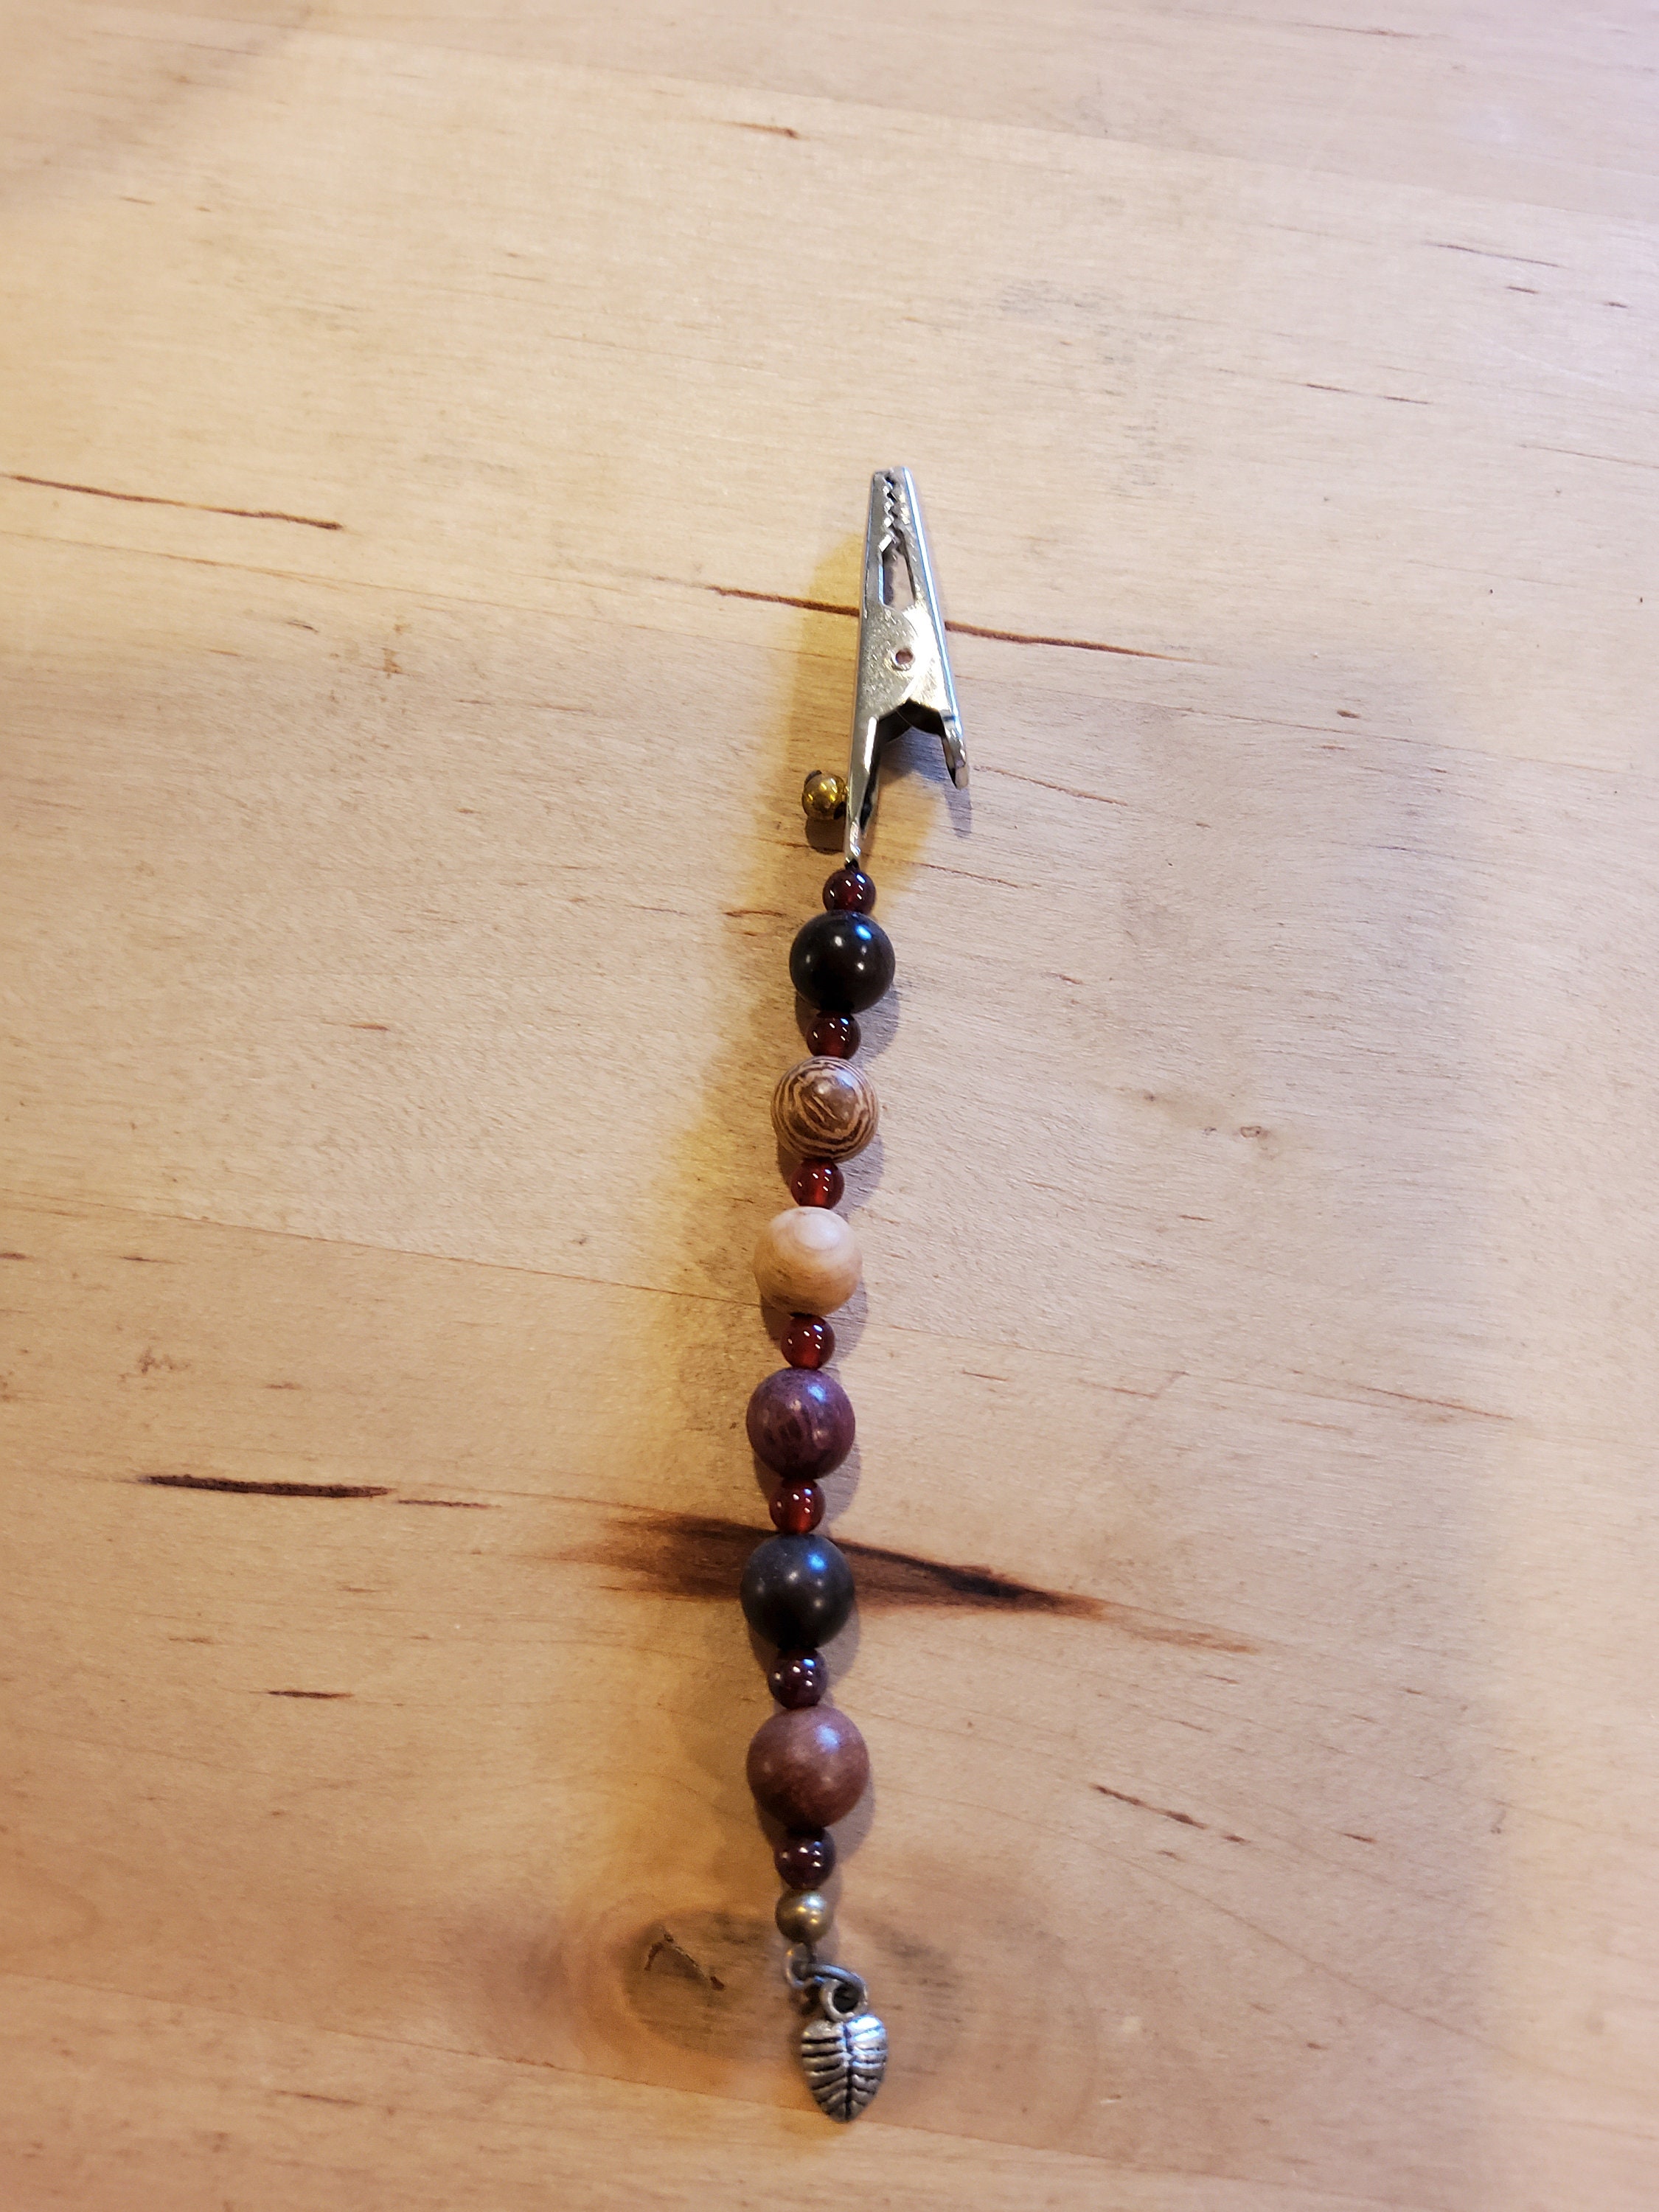 Resin Dab Wands/Roach Clips : r/ResinCasting